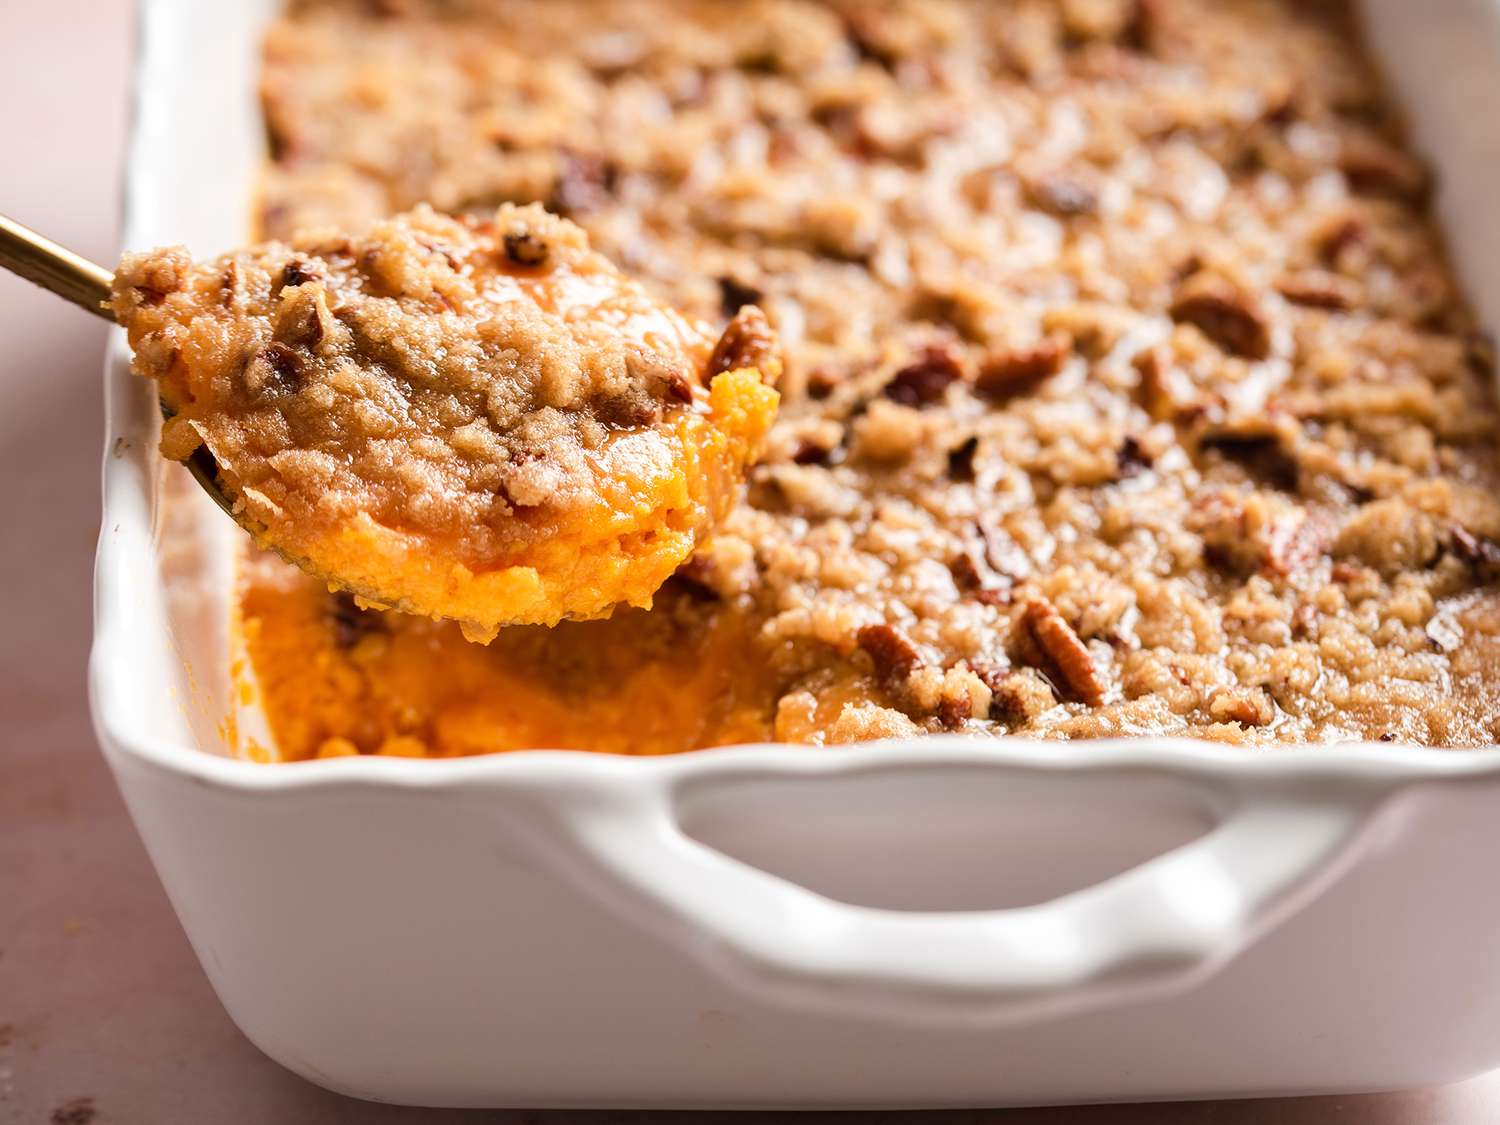 Gourmet Sweet Potato Soufflé: A Nutritious and Delicious Holiday Favorite